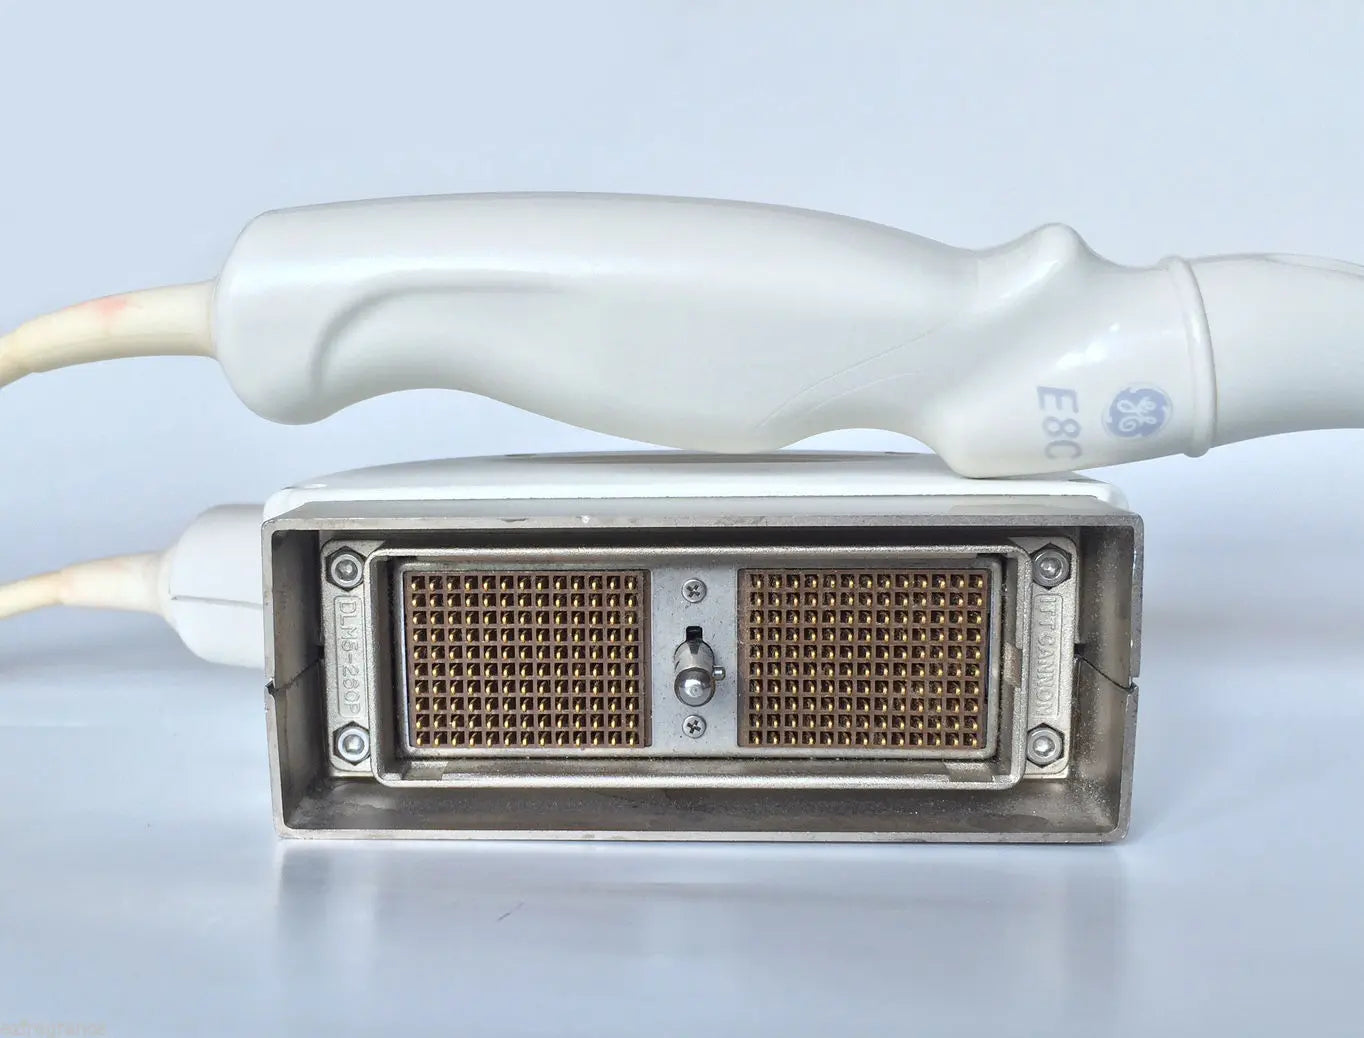 GE E8C transvaginal ultrasound transducer for GE Logiq and Vivid series.USED DIAGNOSTIC ULTRASOUND MACHINES FOR SALE